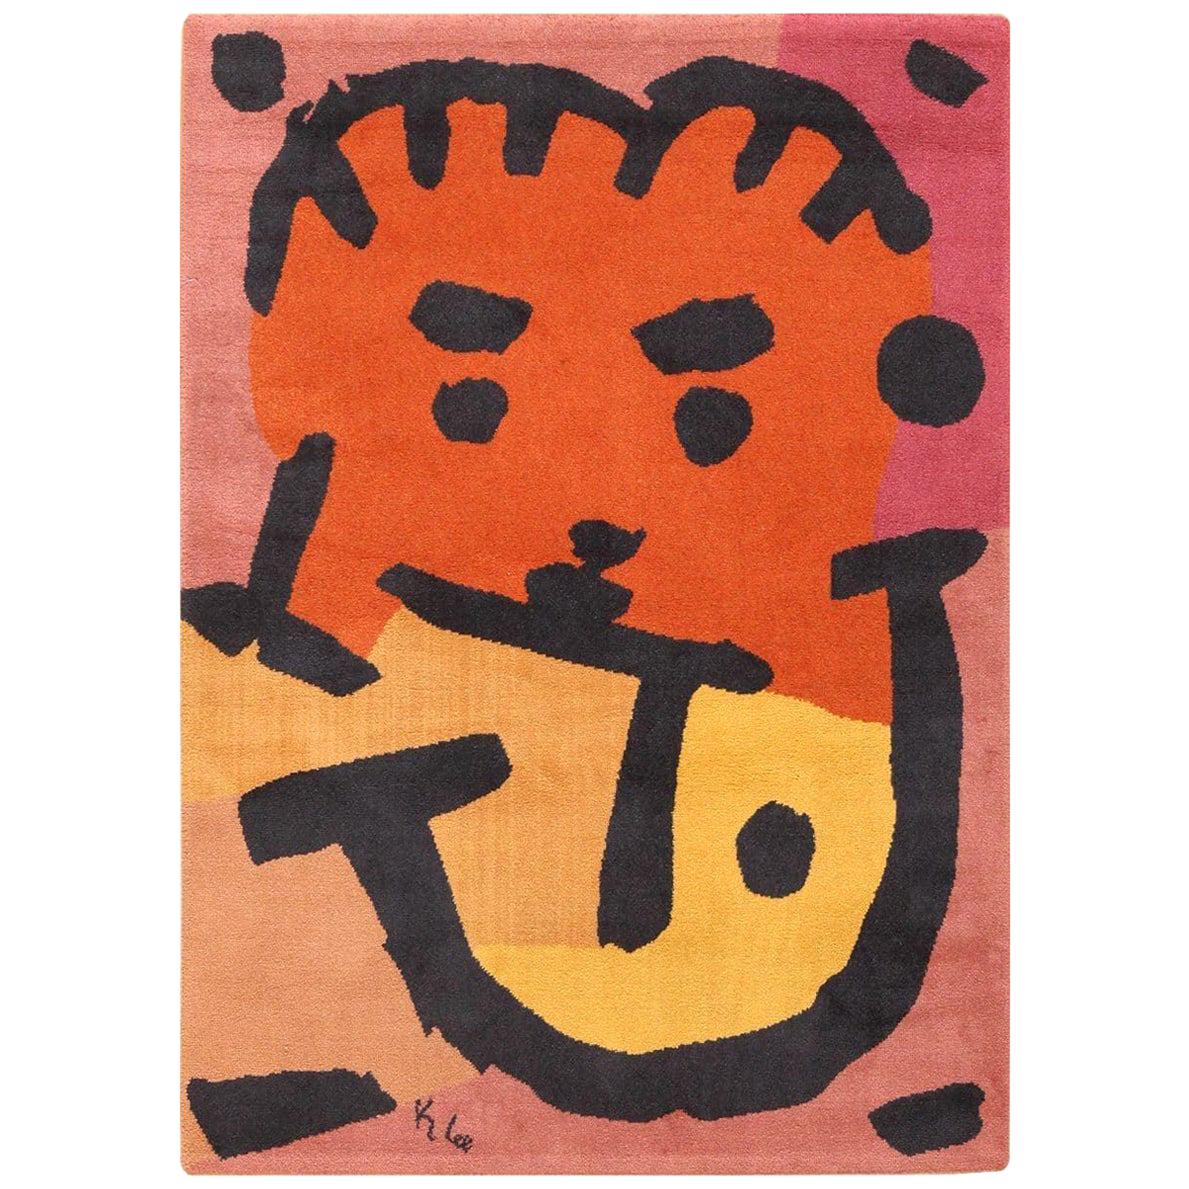 After Paul Klee Artist Rug. Size: 4 ft 8 in x 6 ft 6 in